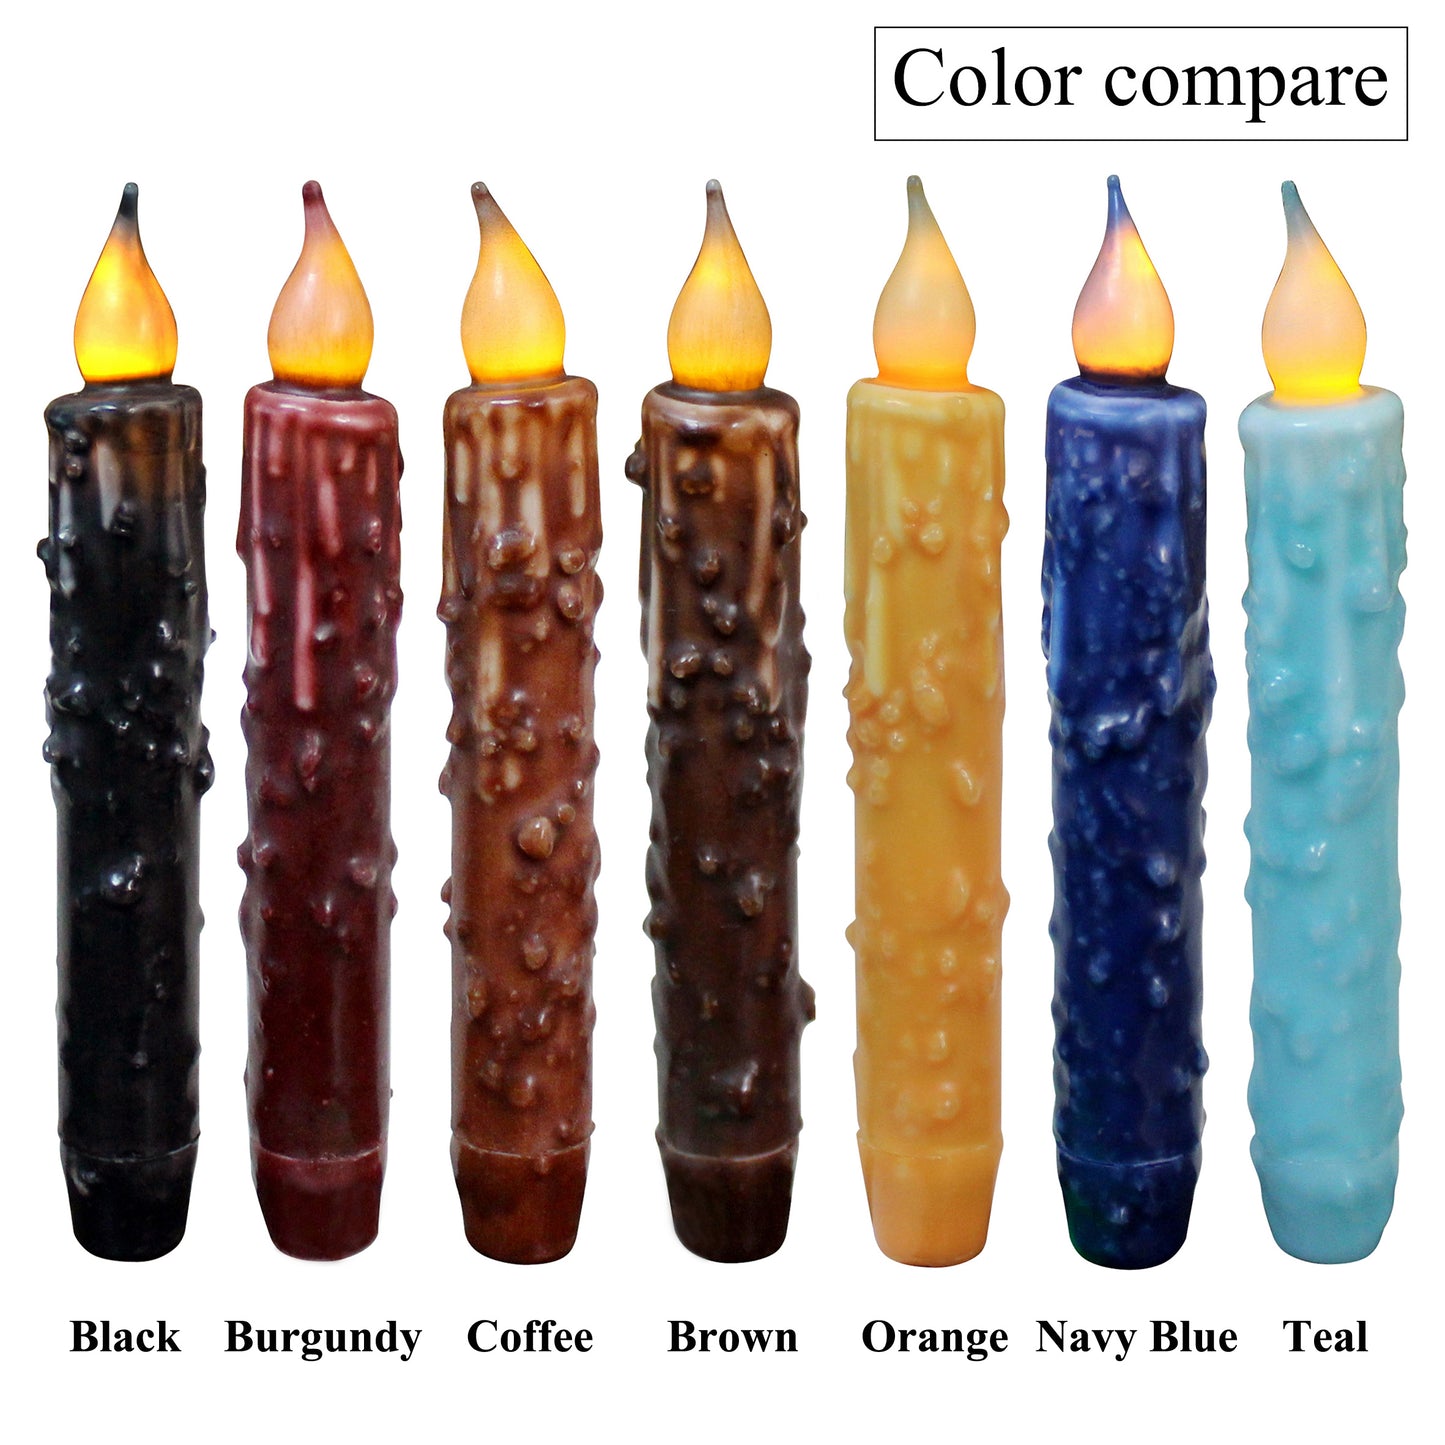 CVHOMEDECO. Real Wax Hand Dipped Battery Operated LED Timer Taper Candles Country Primitive Flameless Lights Décor, 6.75 Inch, Coffee, 2 PCS in a Package